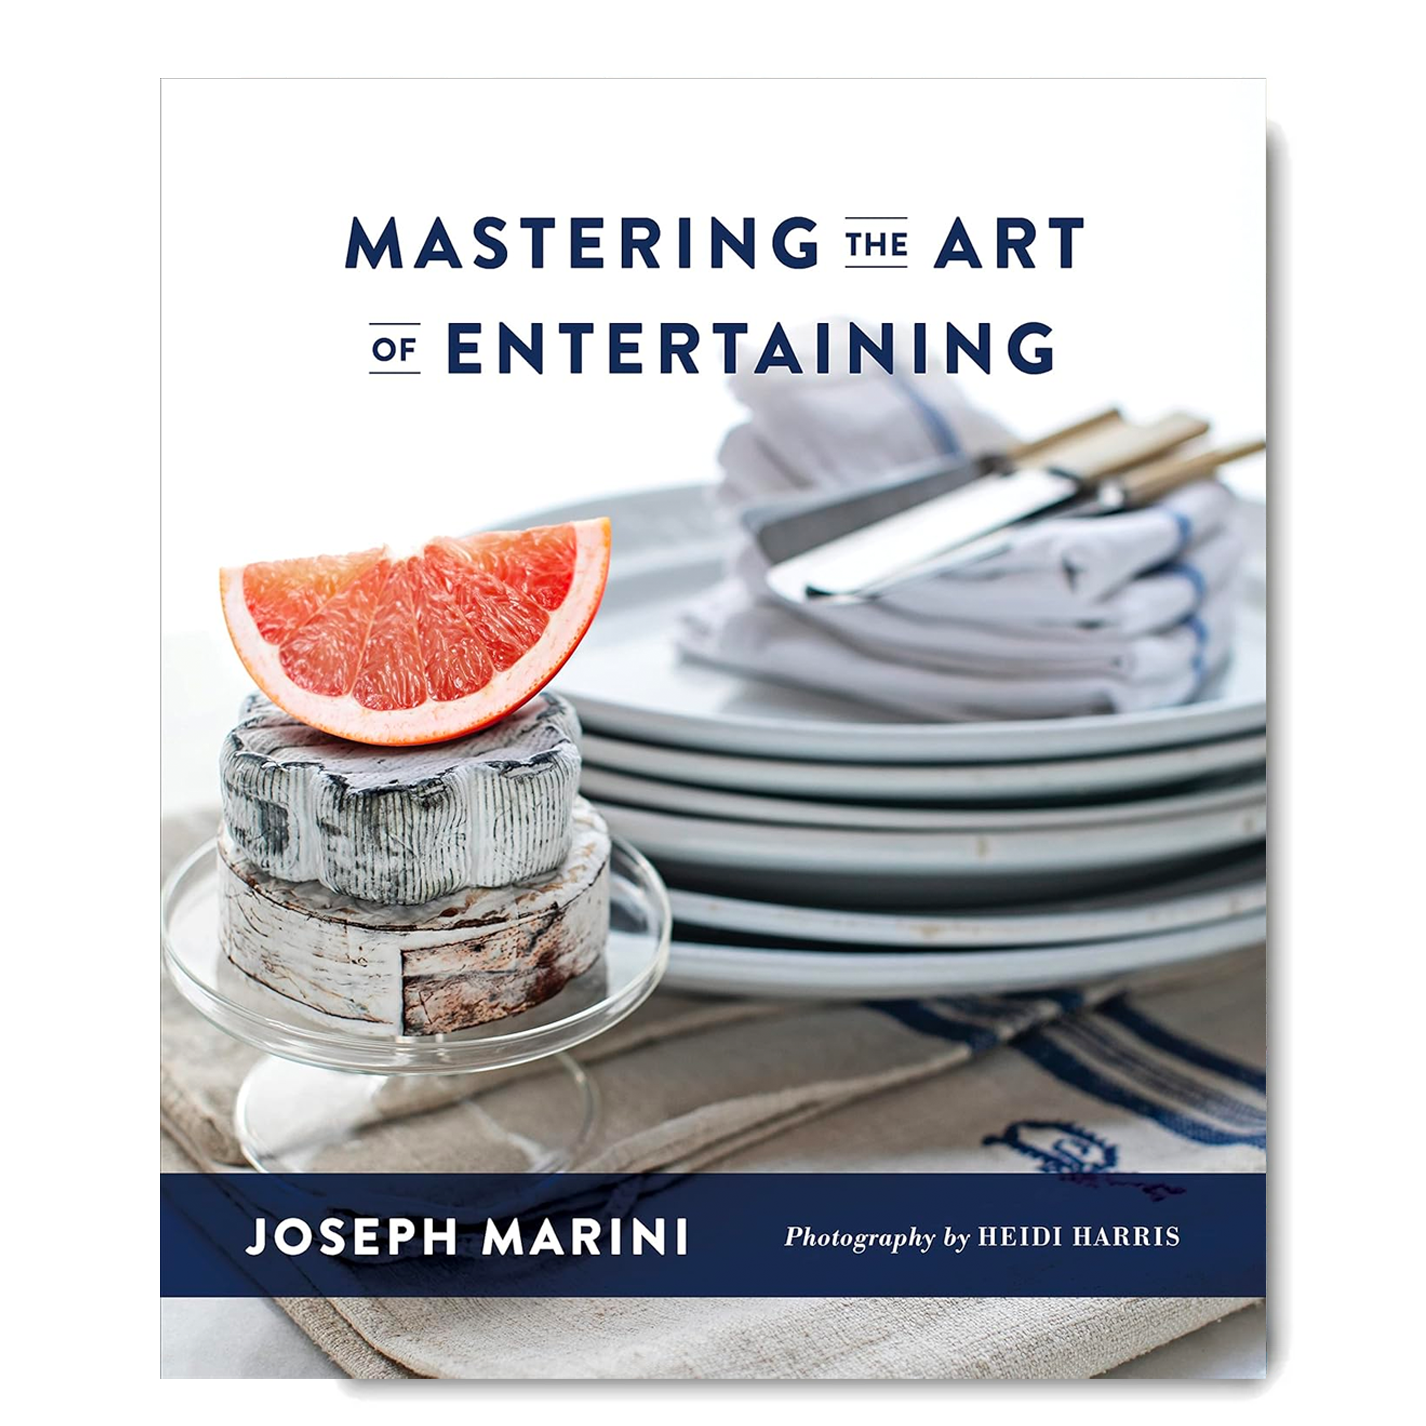 "Mastering the Art of Entertaining" Book